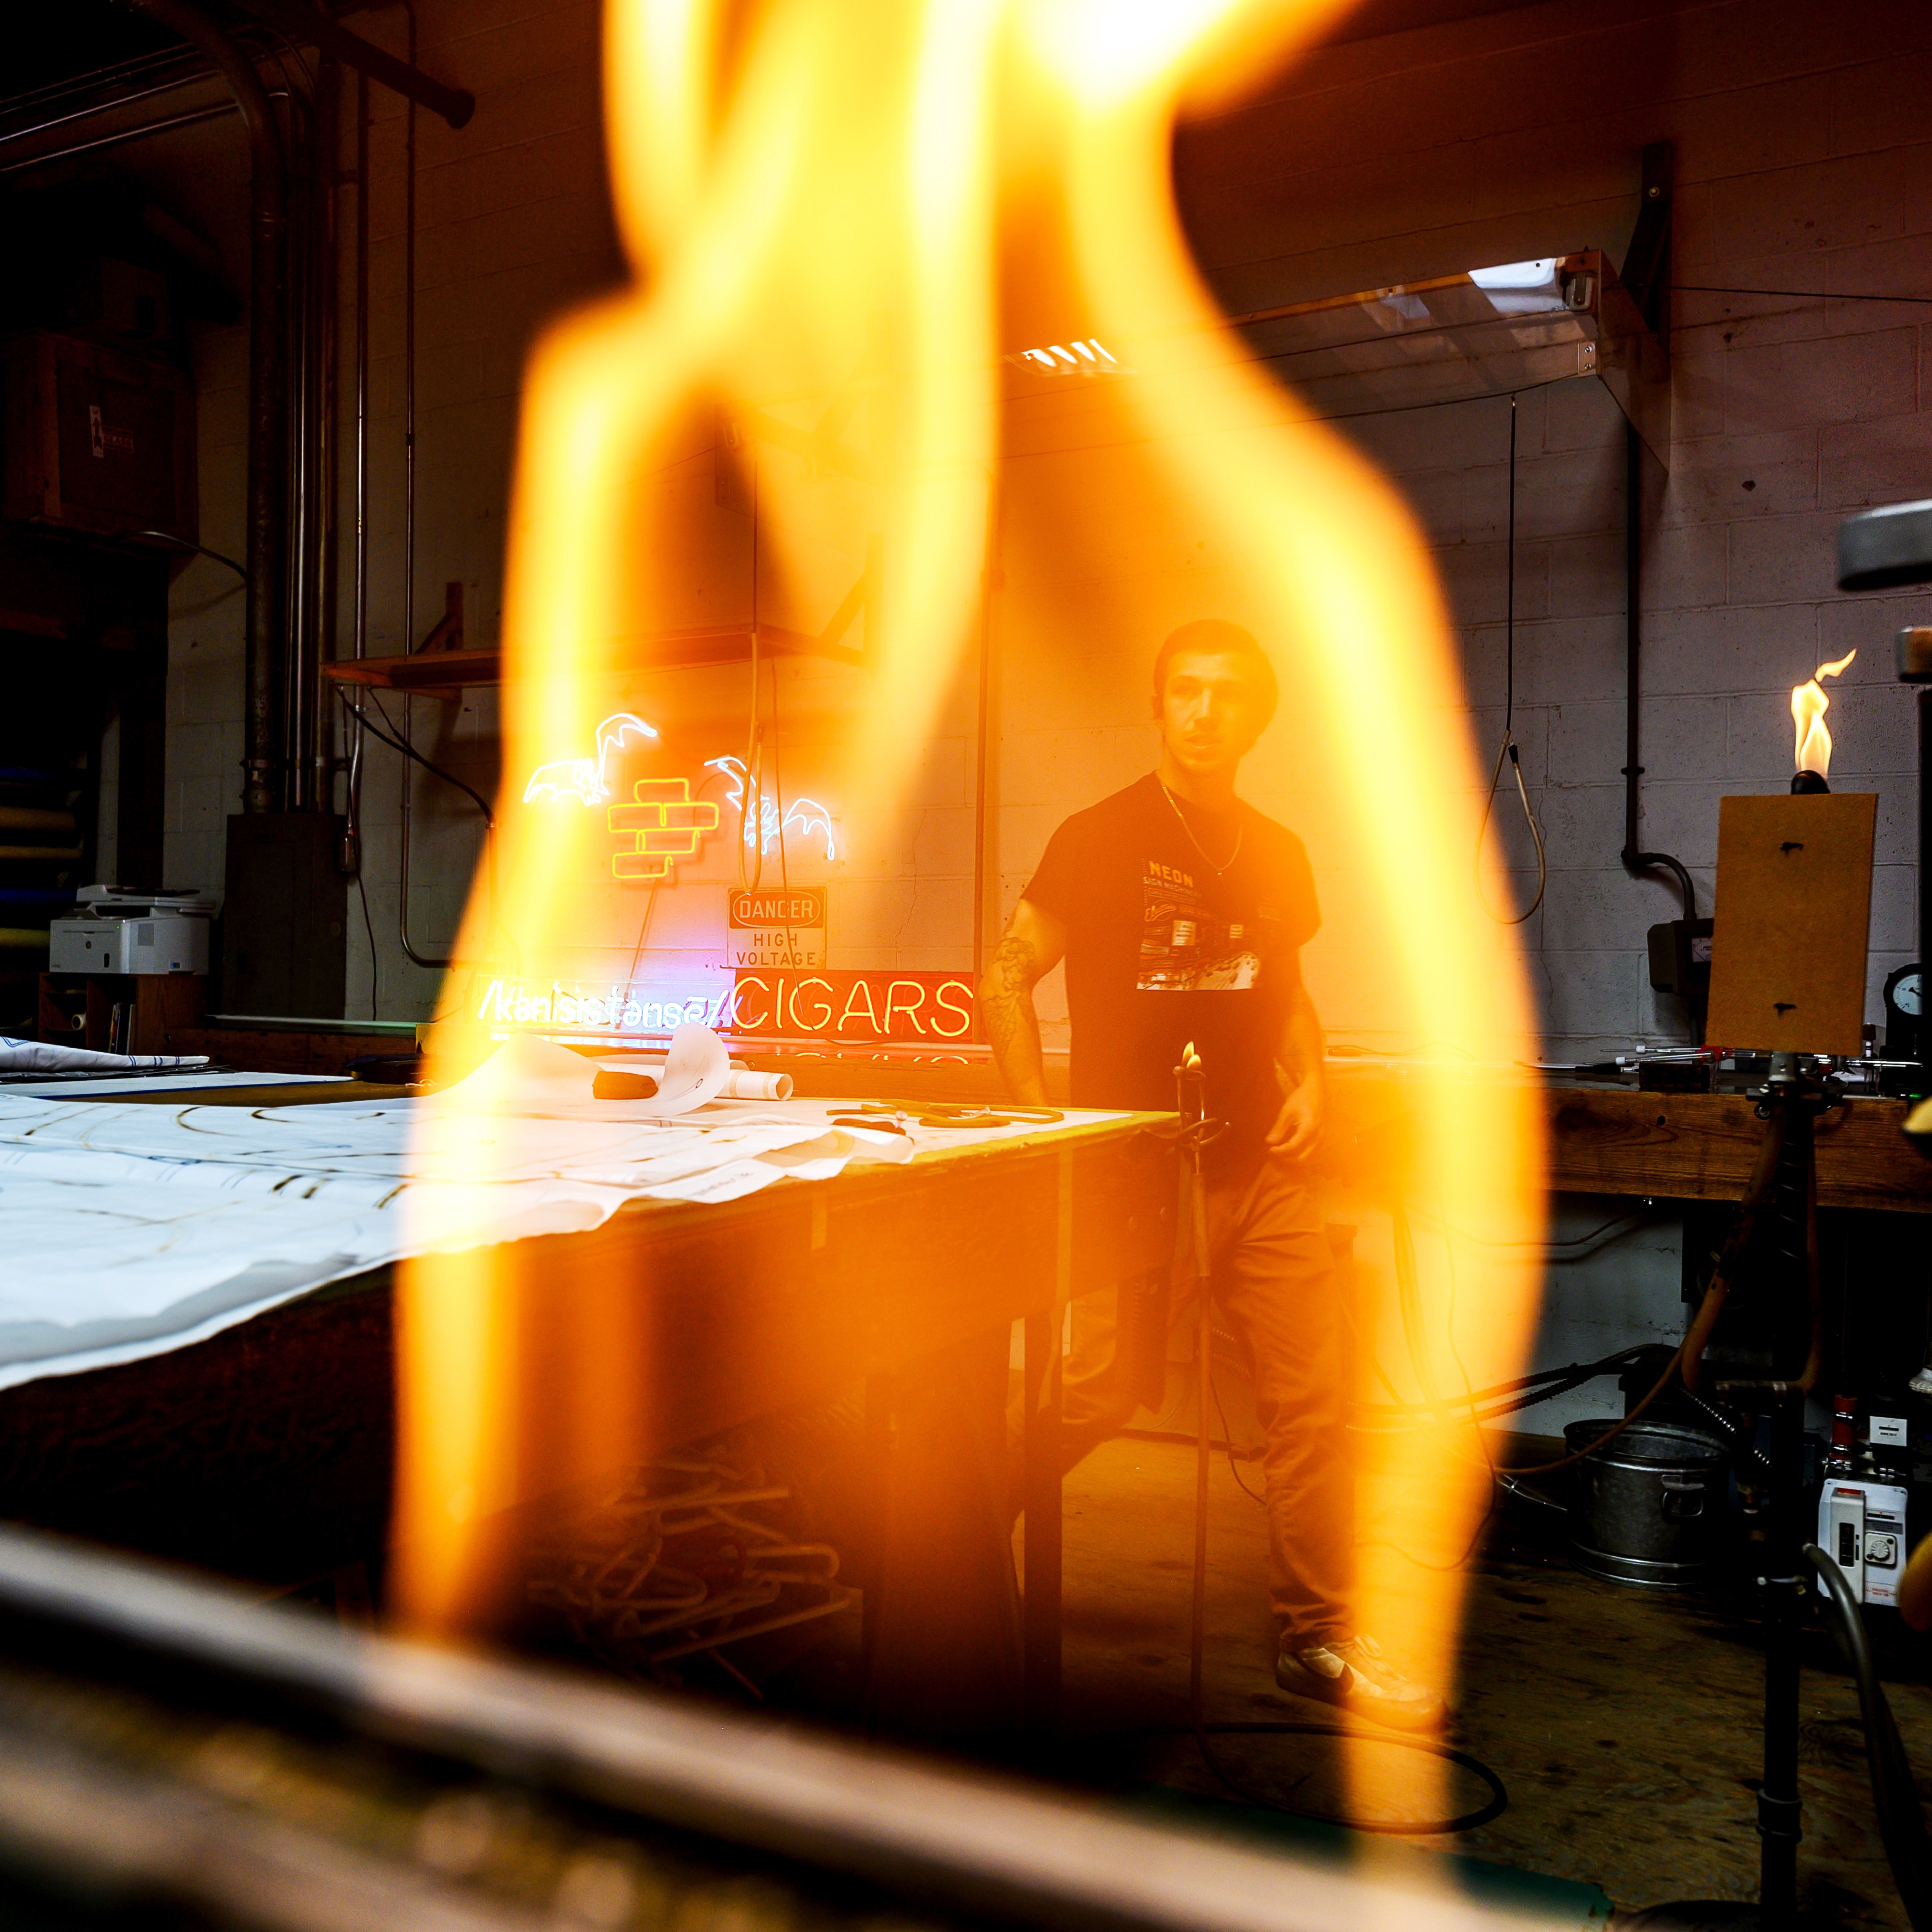 A large flame of fire in the foreground with a man in the background of a workshop.